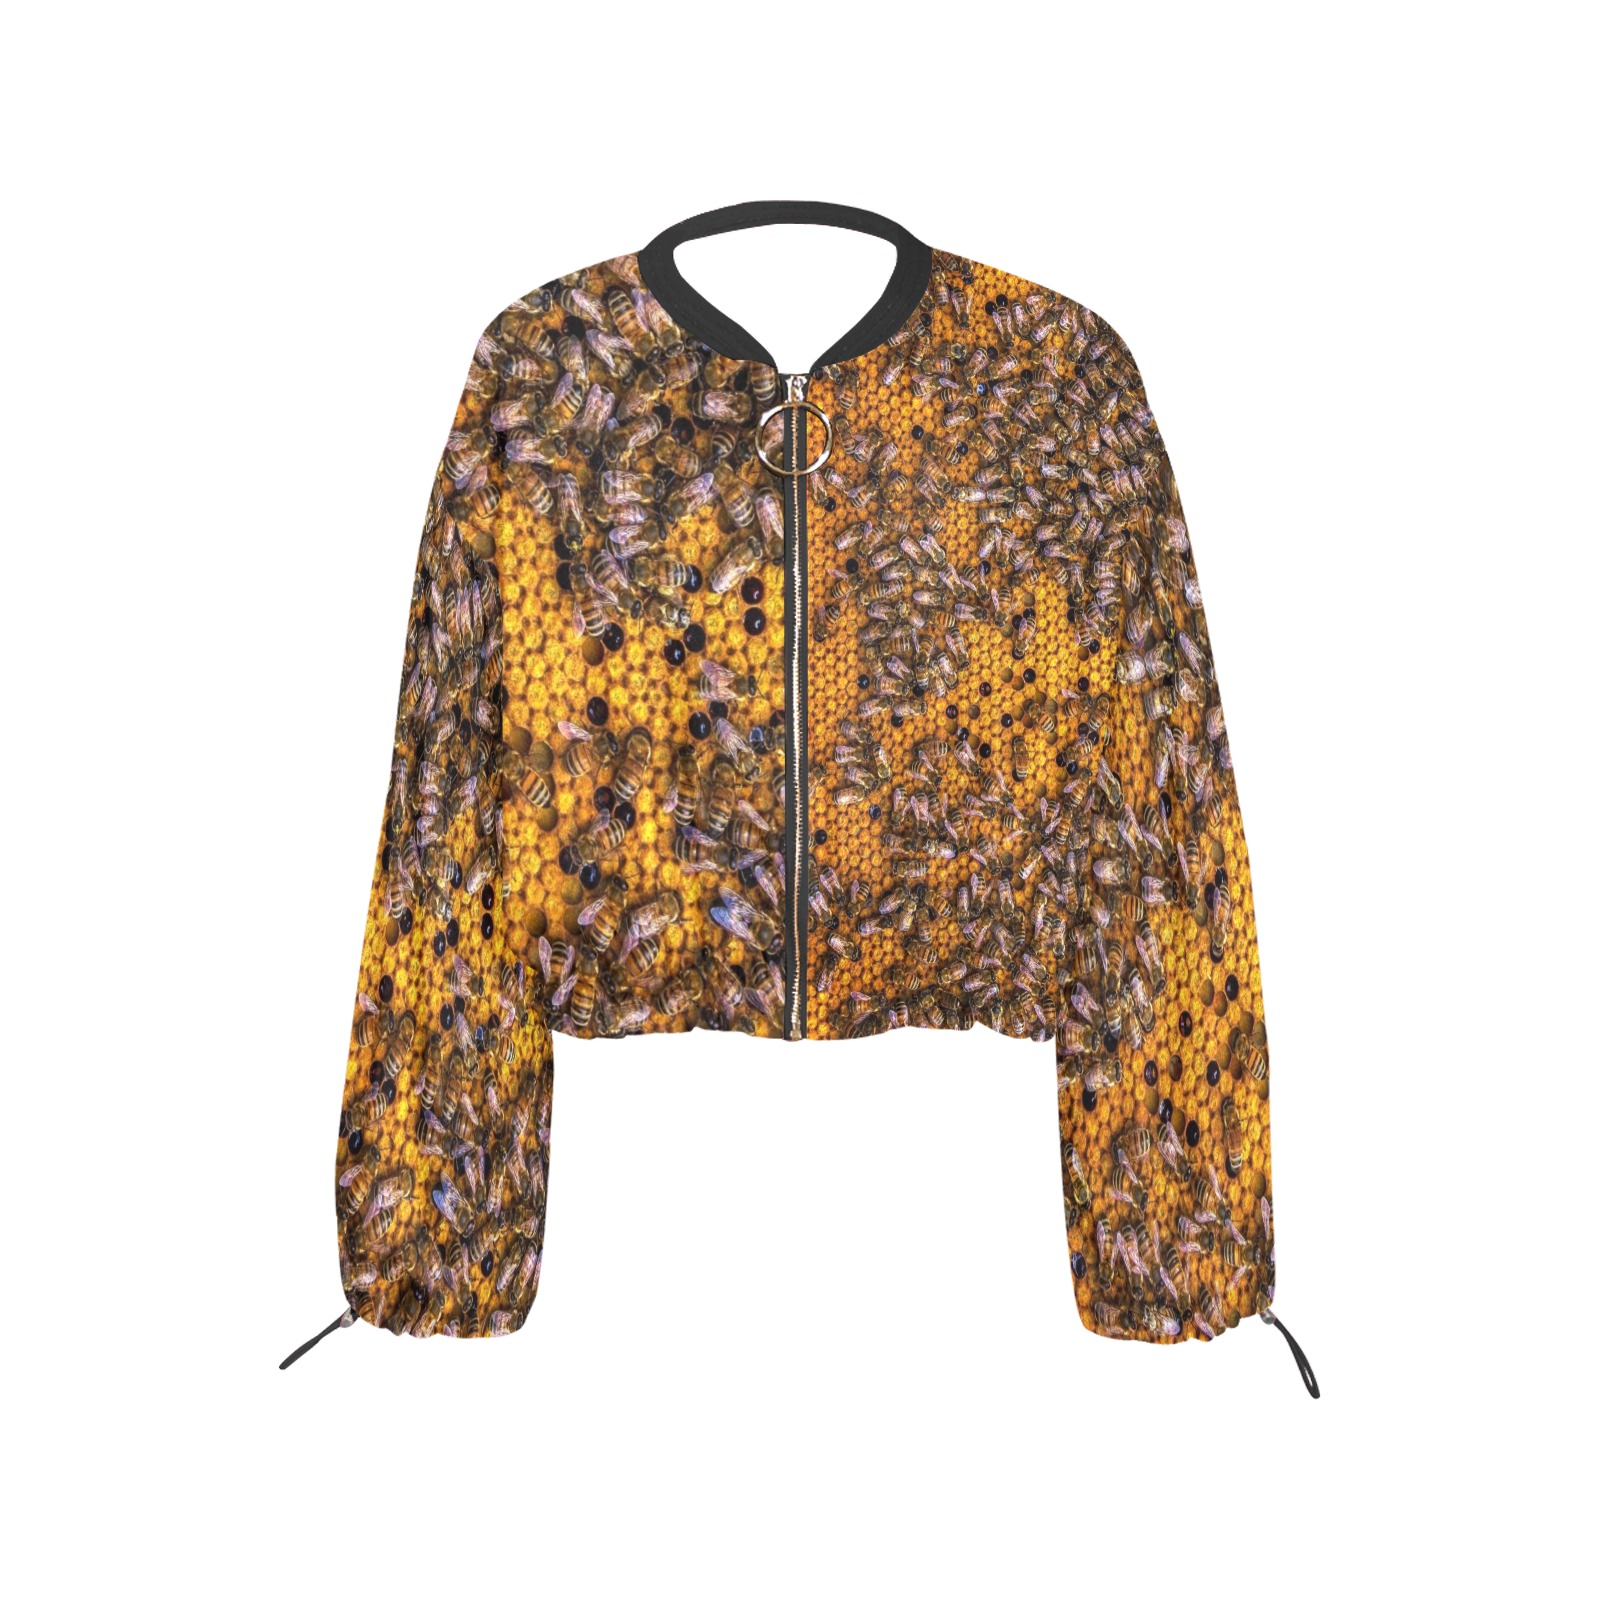 HONEY BEES 3 Cropped Chiffon Jacket for Women (Model H30)